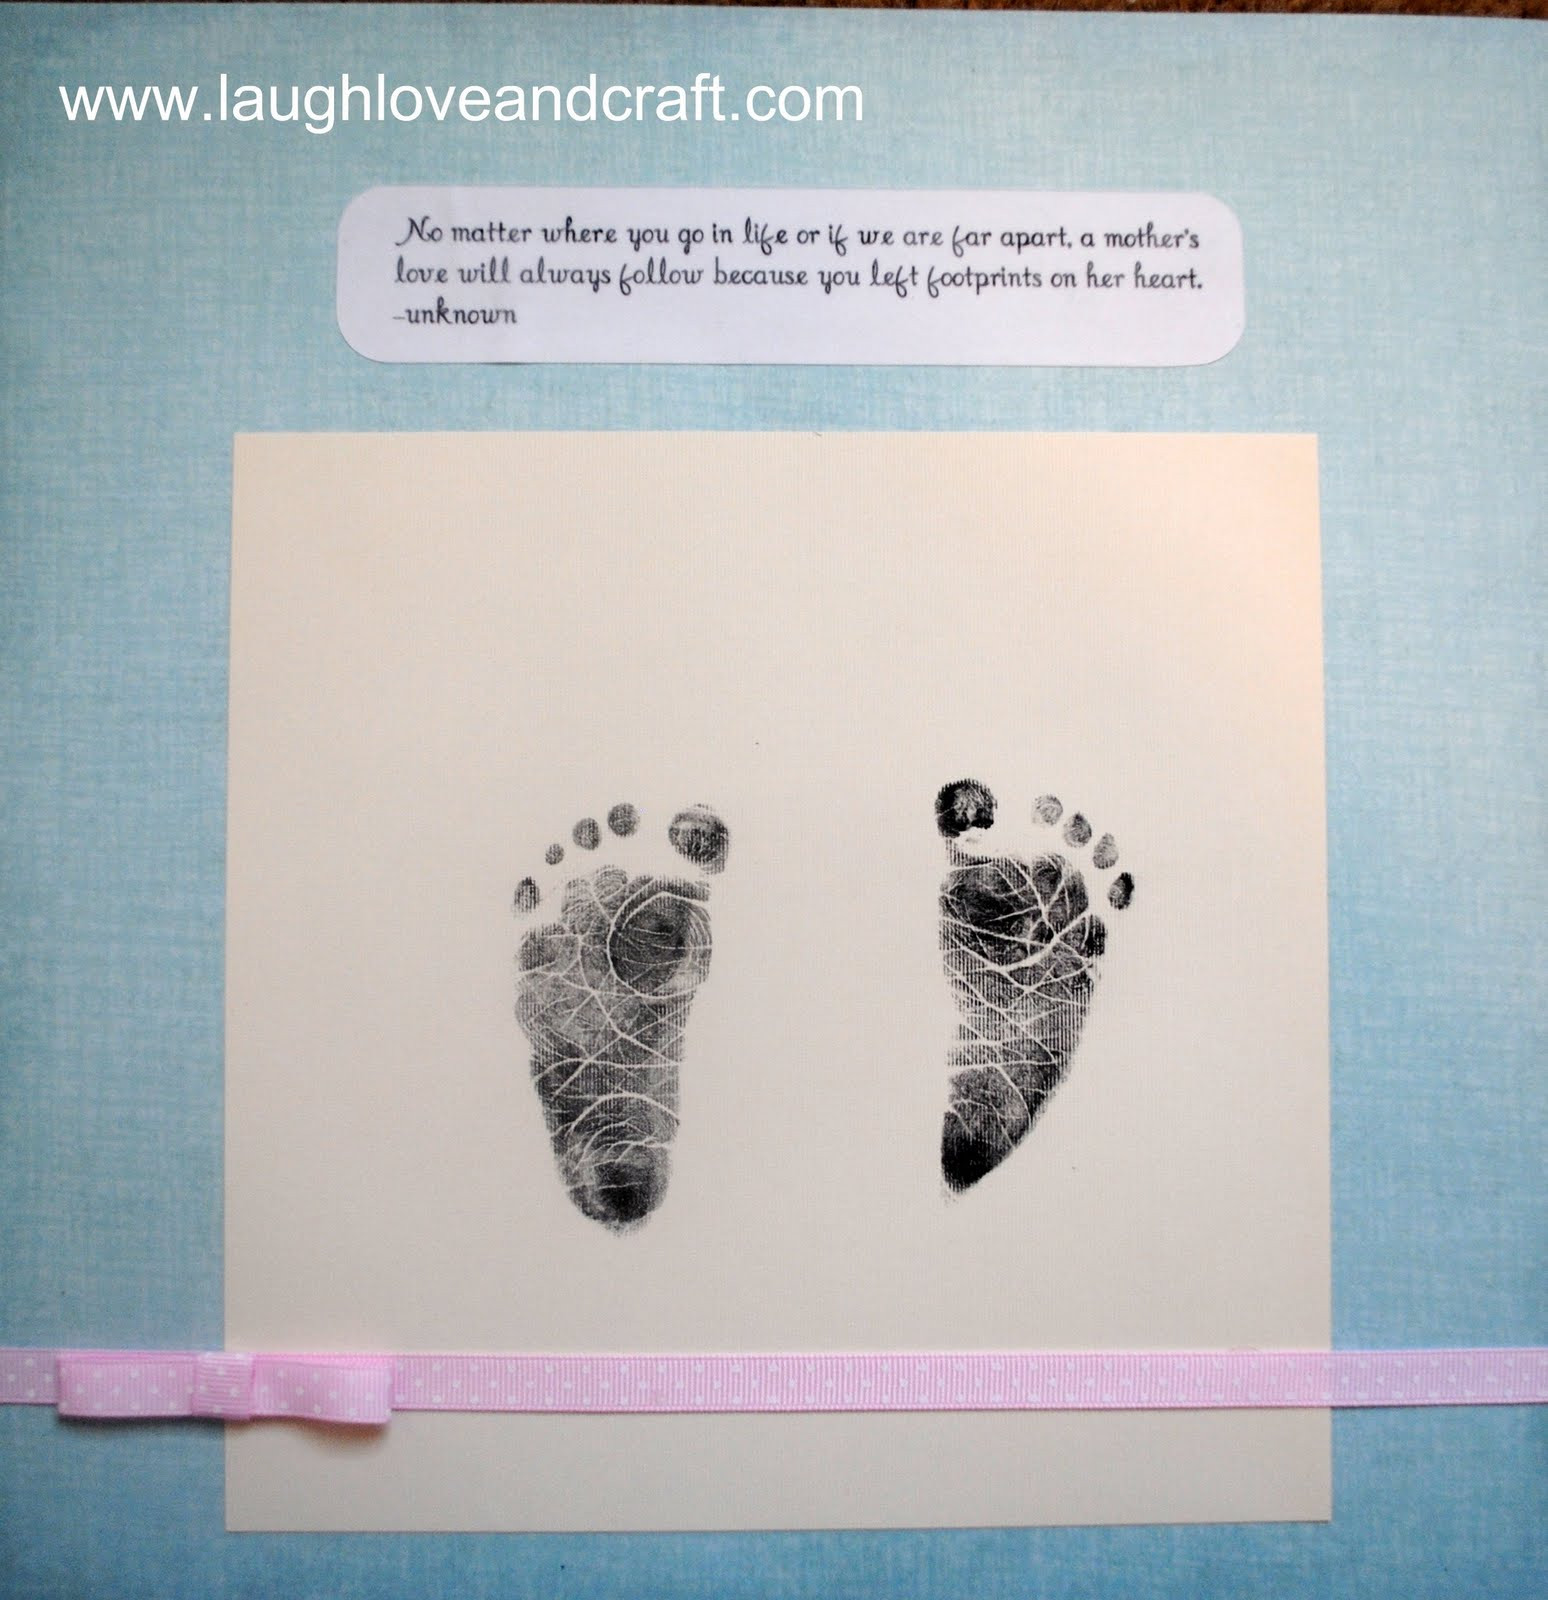 Baby Footprint Quote
 Laugh Love and Craft Scrapbook Saturday Baby Footprints